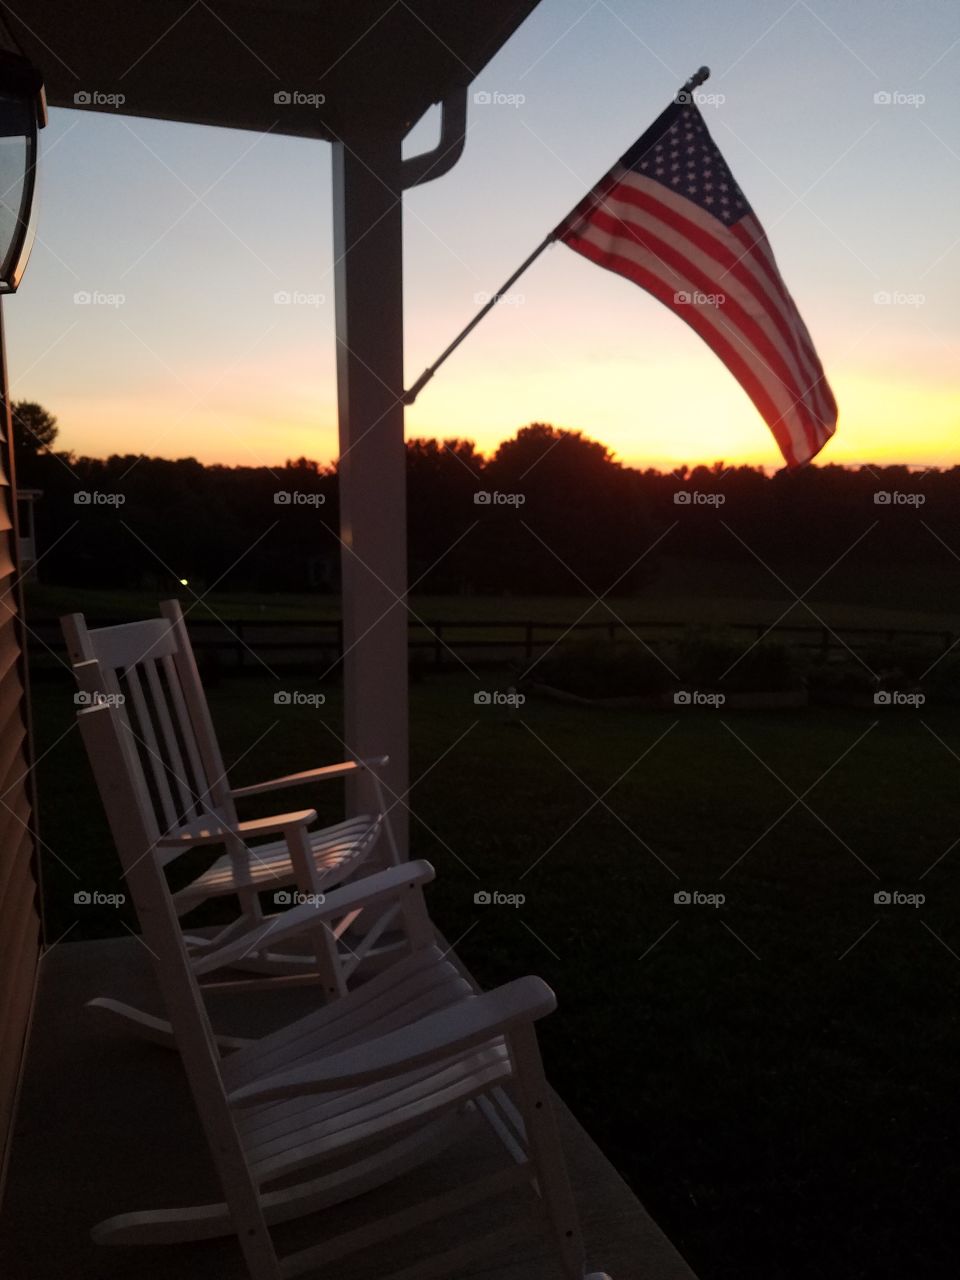 Sunset on the porch